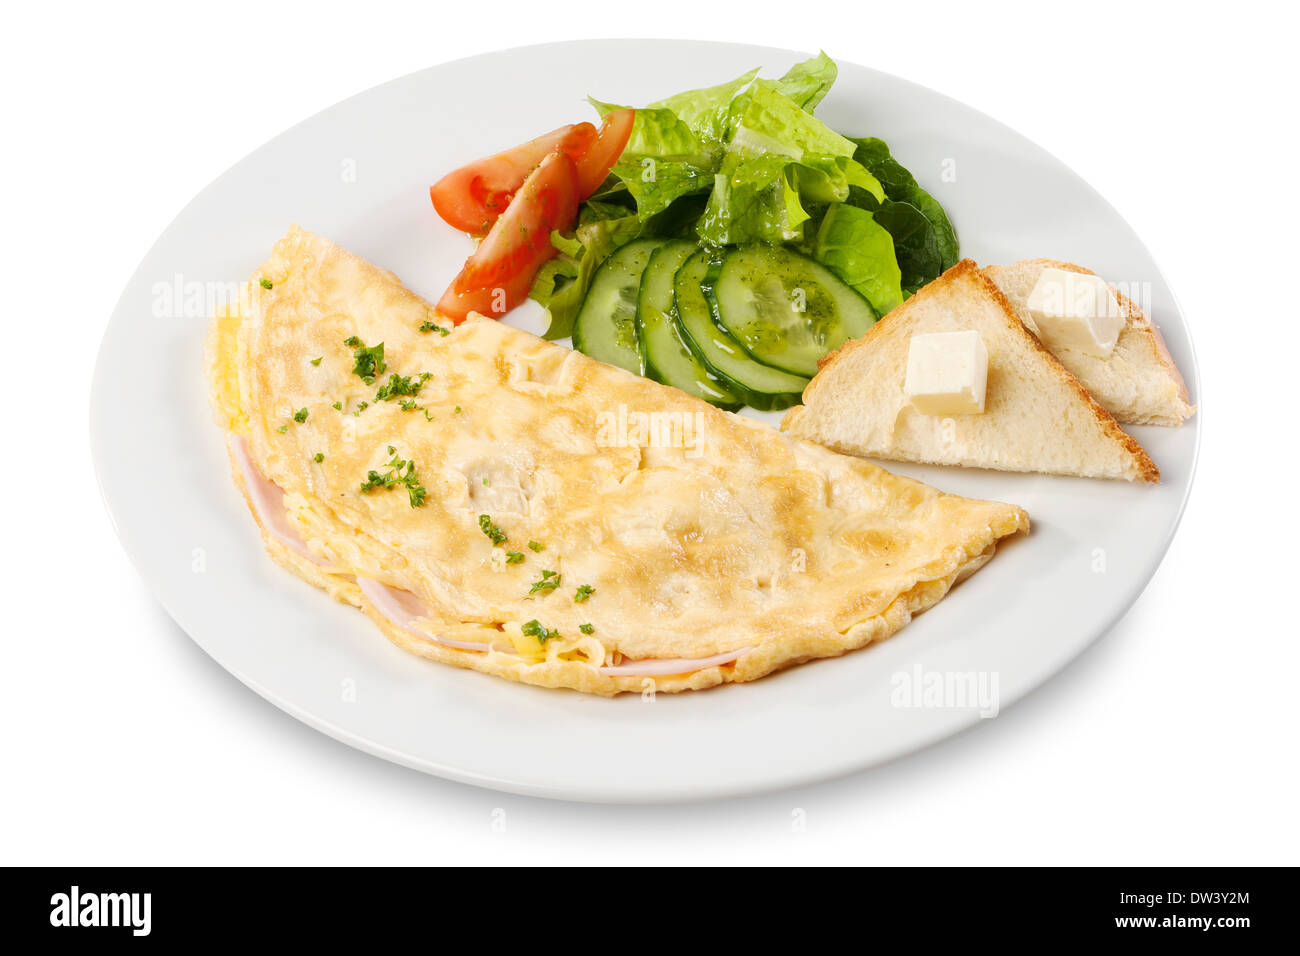 Omelet with ham, tomato and cucumber on plate Stock Photo